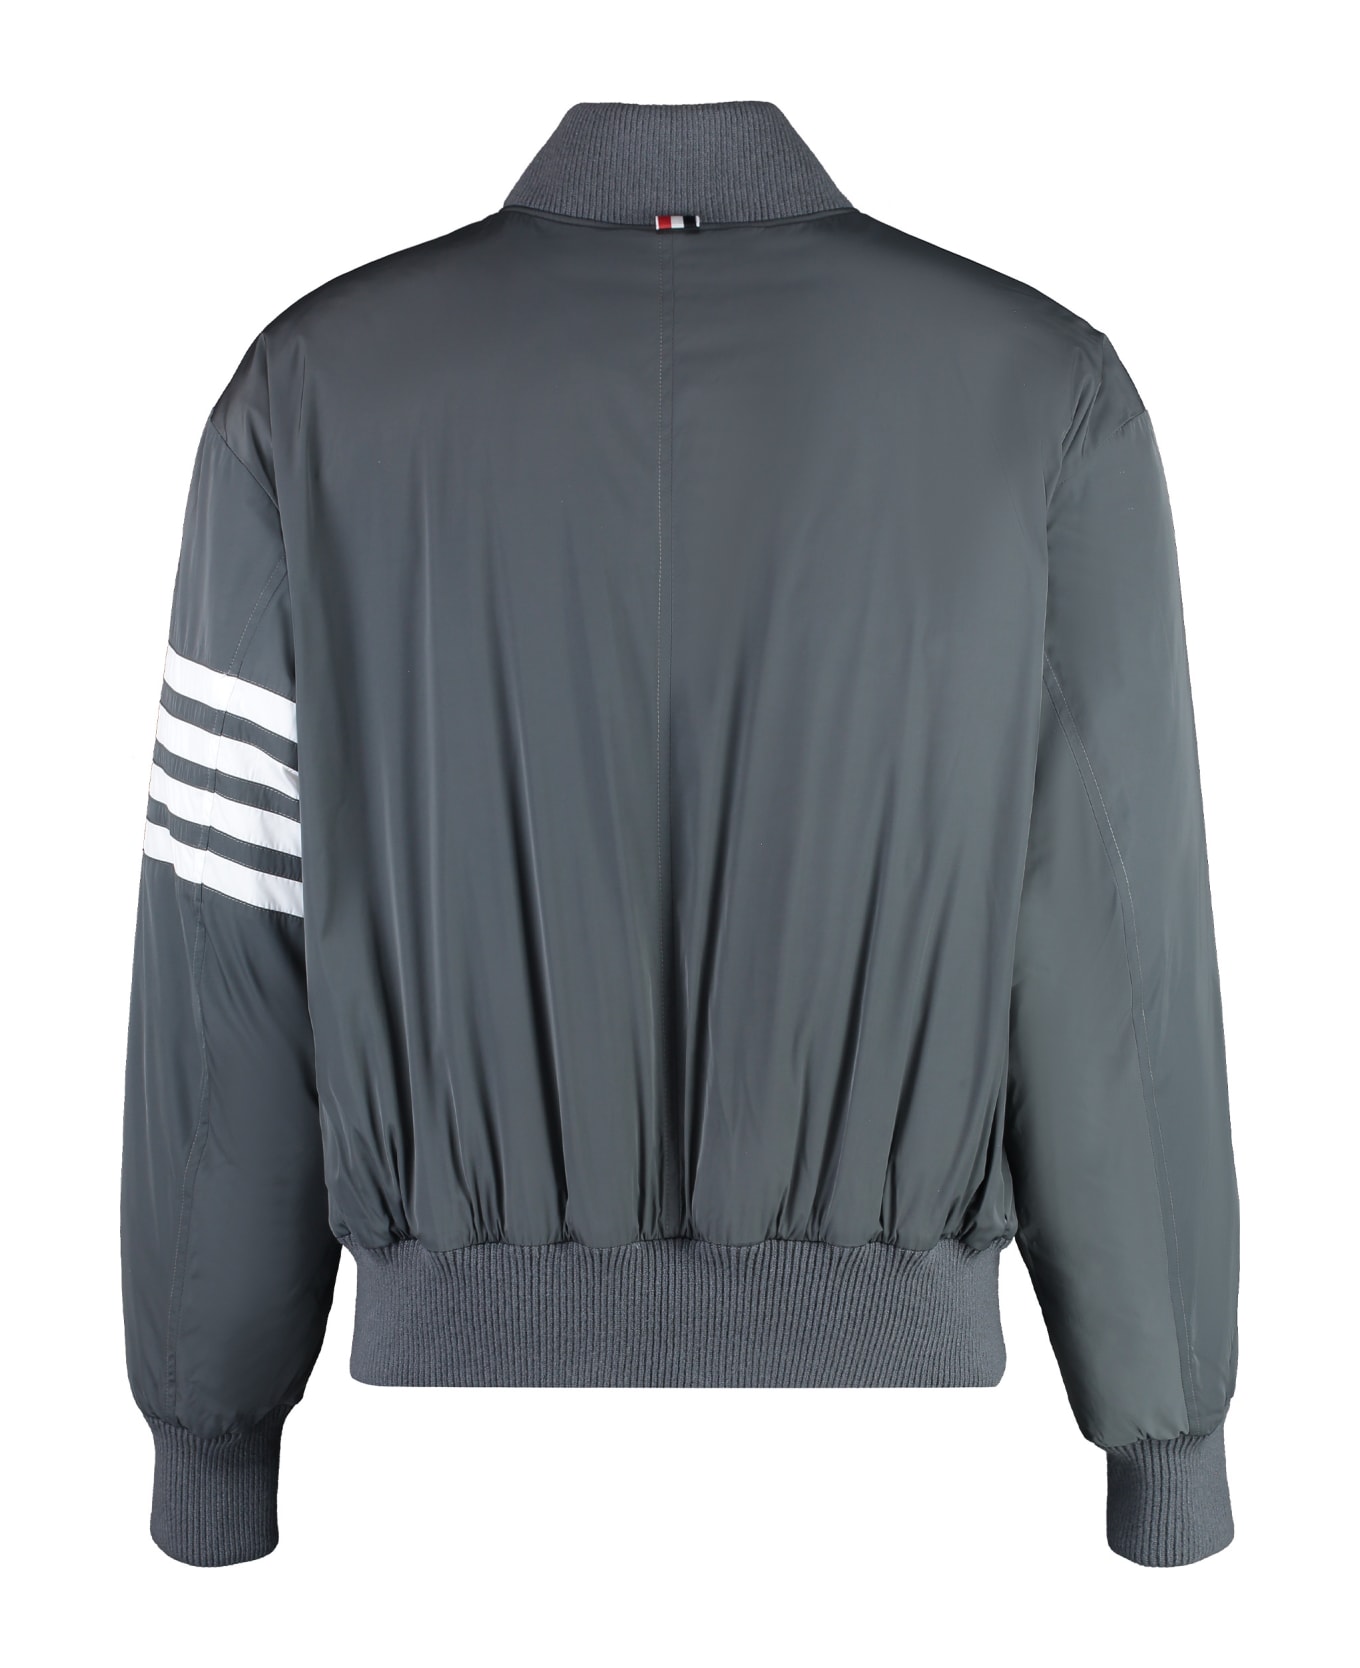 Thom Browne Bomber Jacket In Technical Fabric - grey